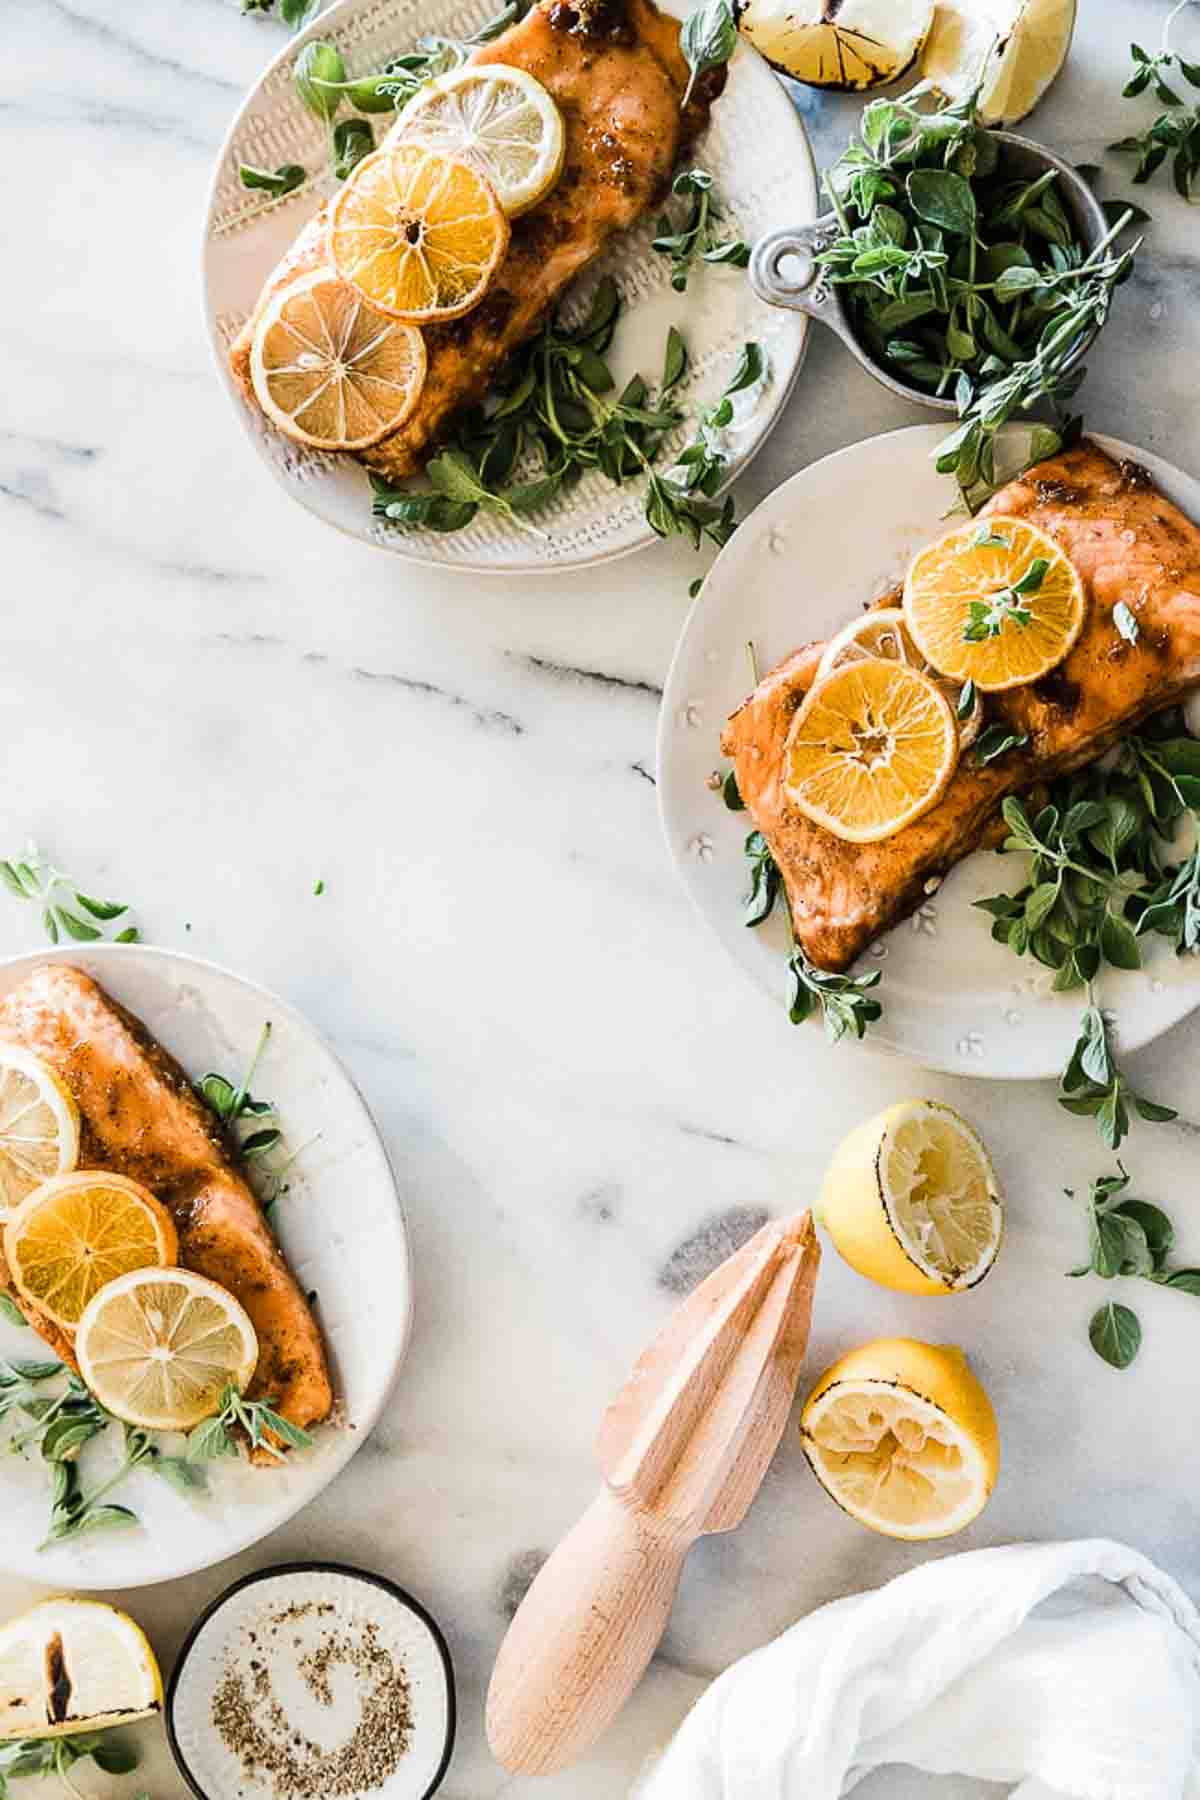 Glazed salmon on white plates, garnished with lemon slices and thyme.